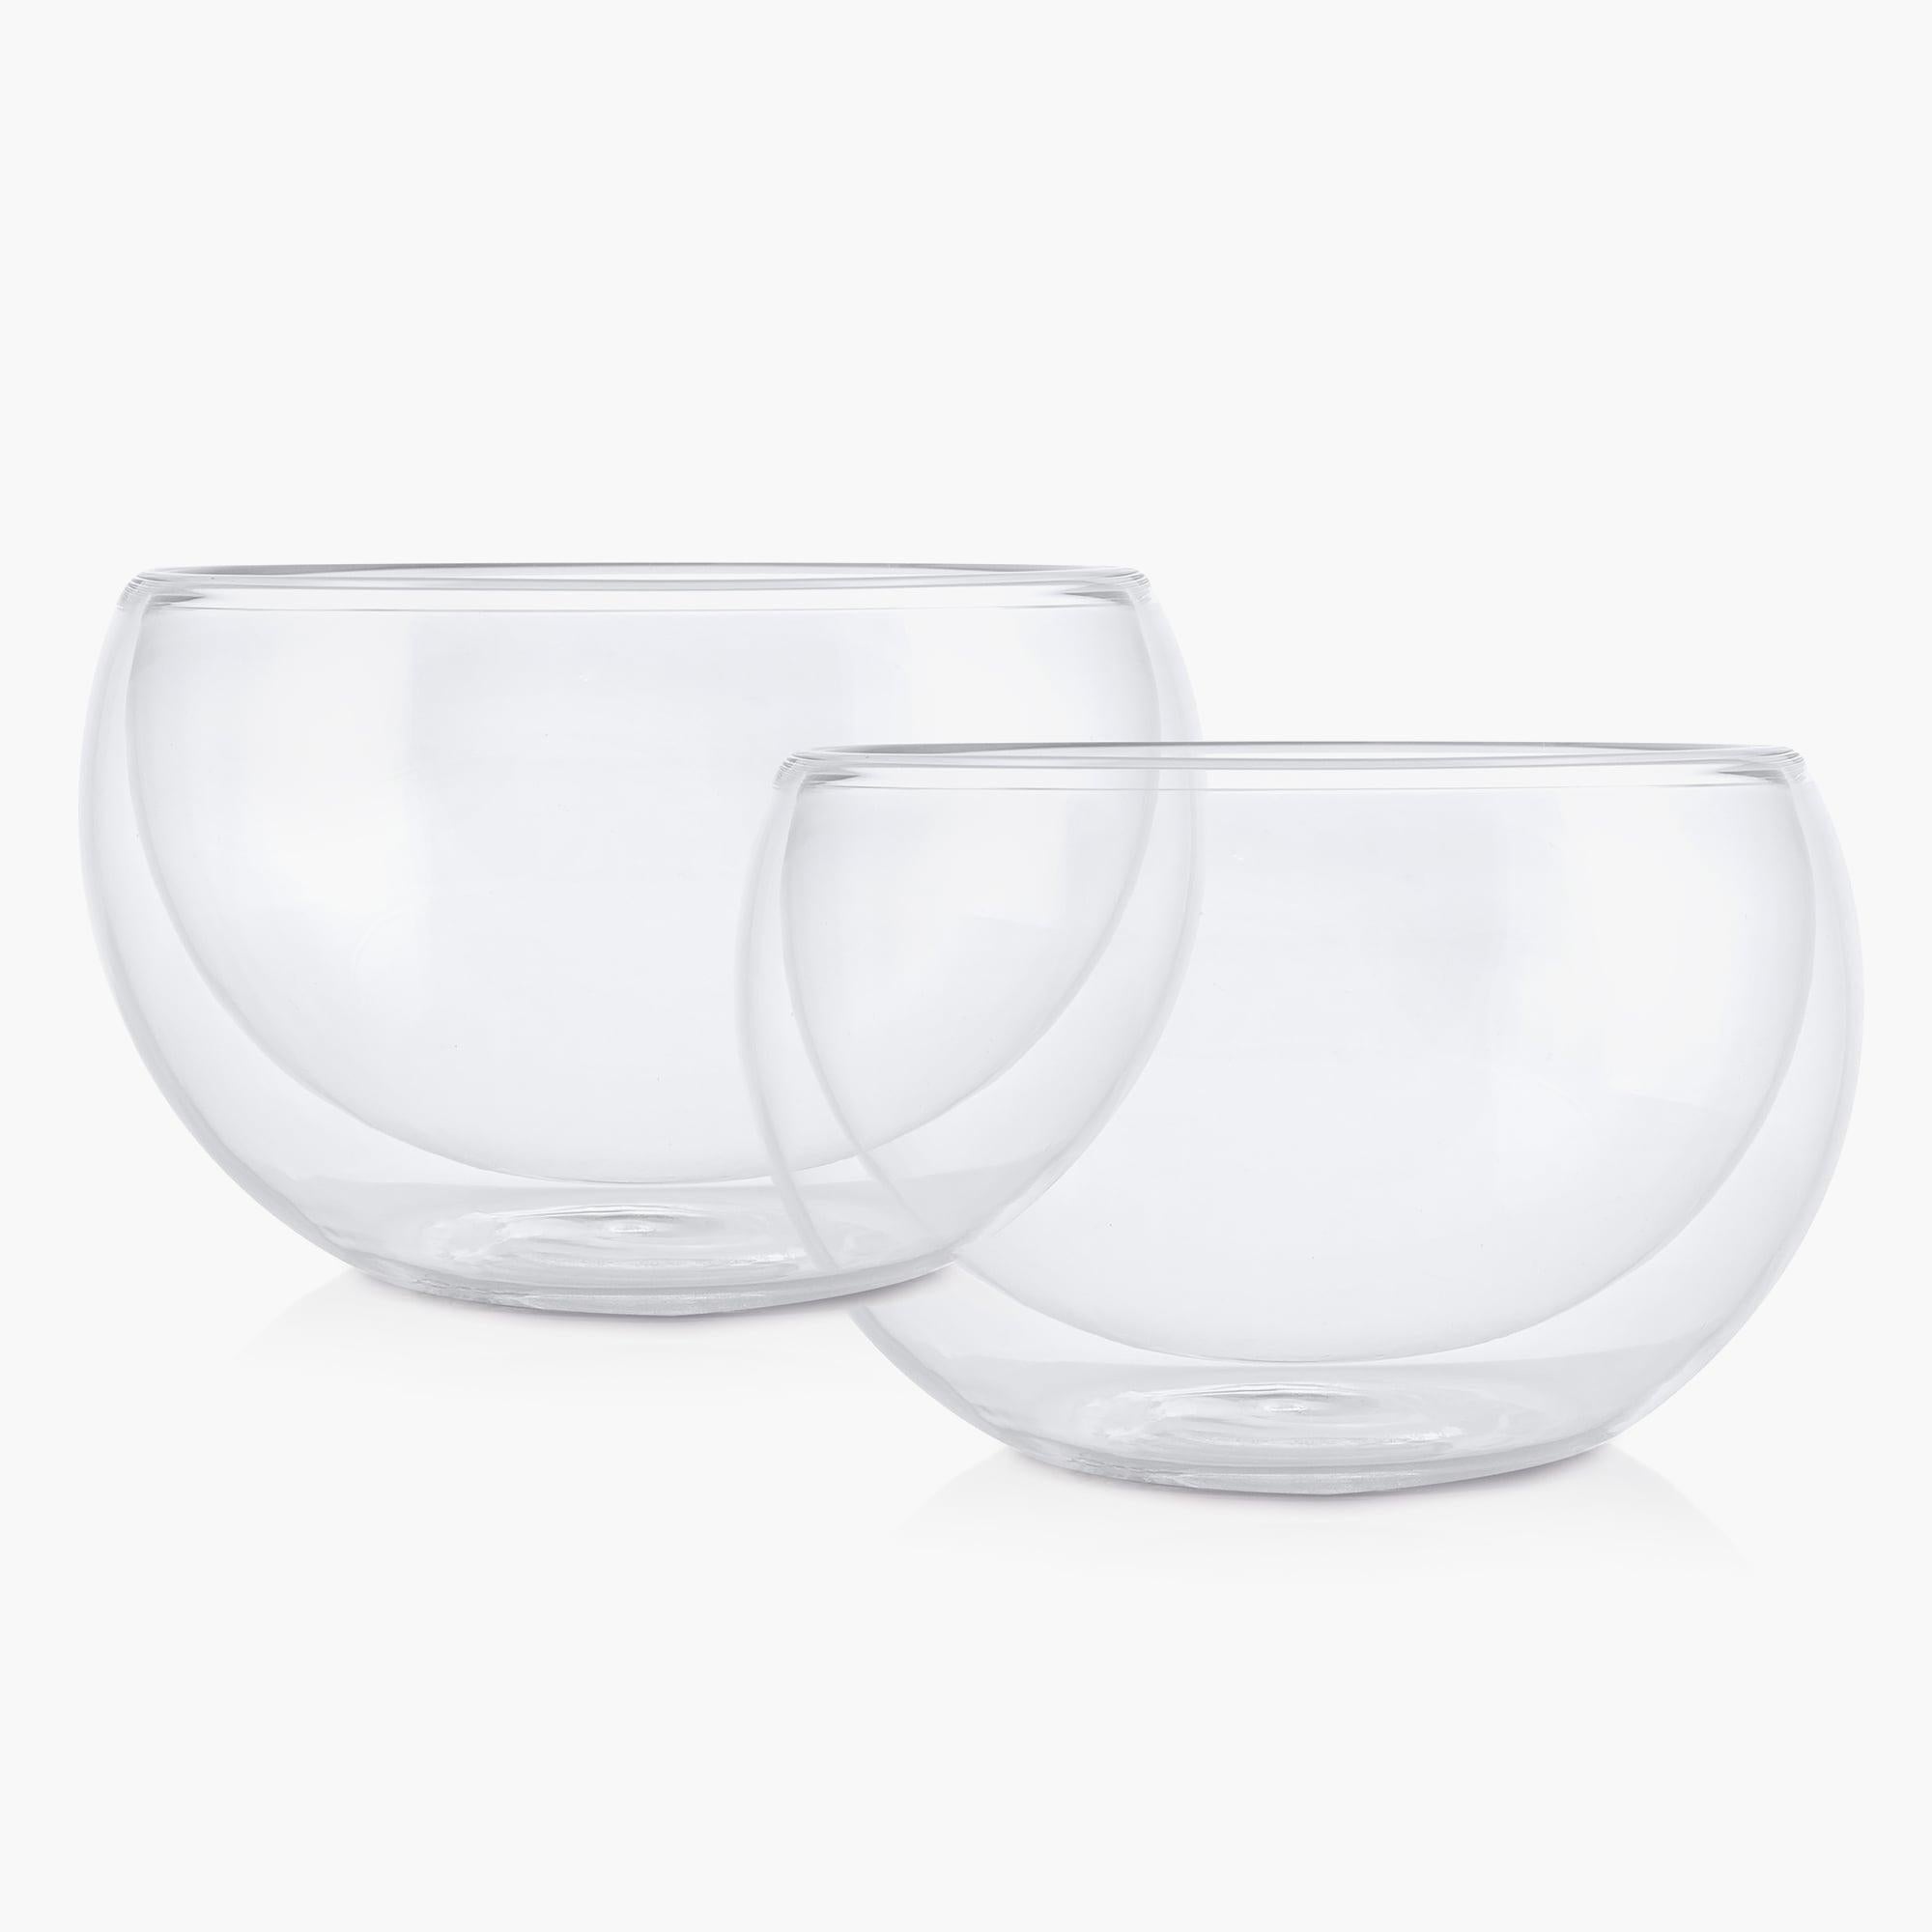 Set of Two Double Wall 13-Oz Glass Bowls